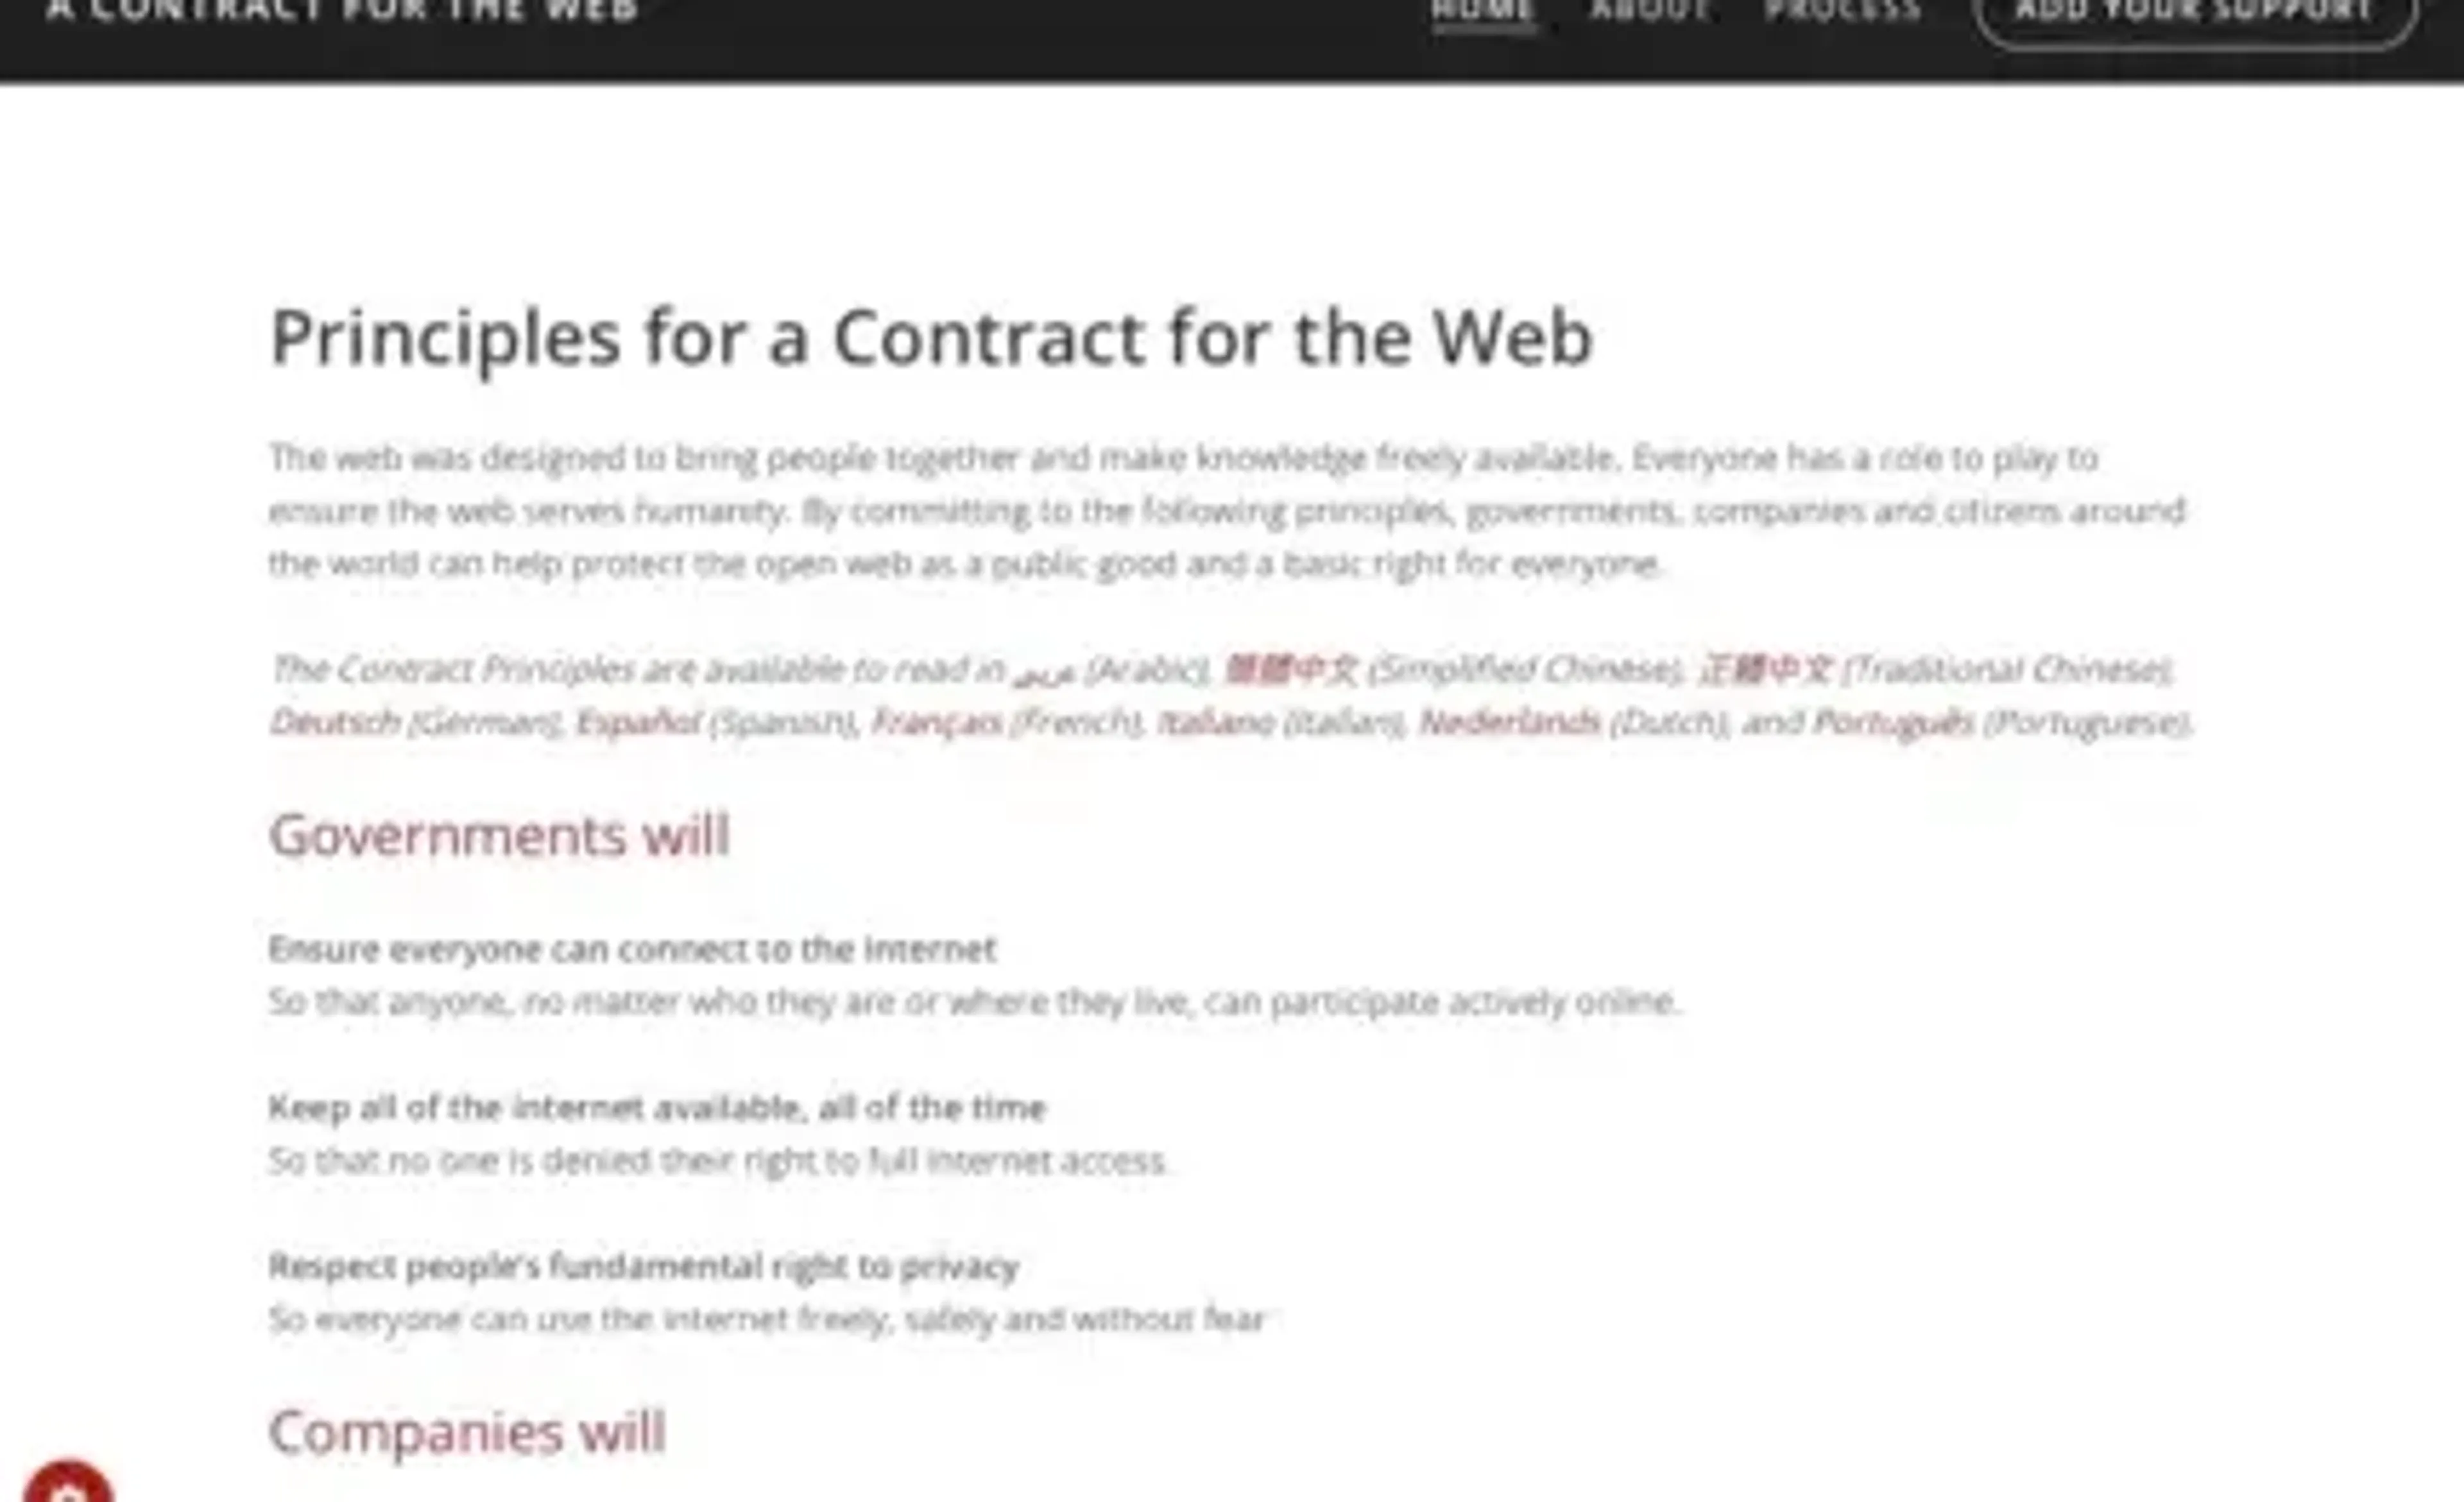 Principles for a contract on the web